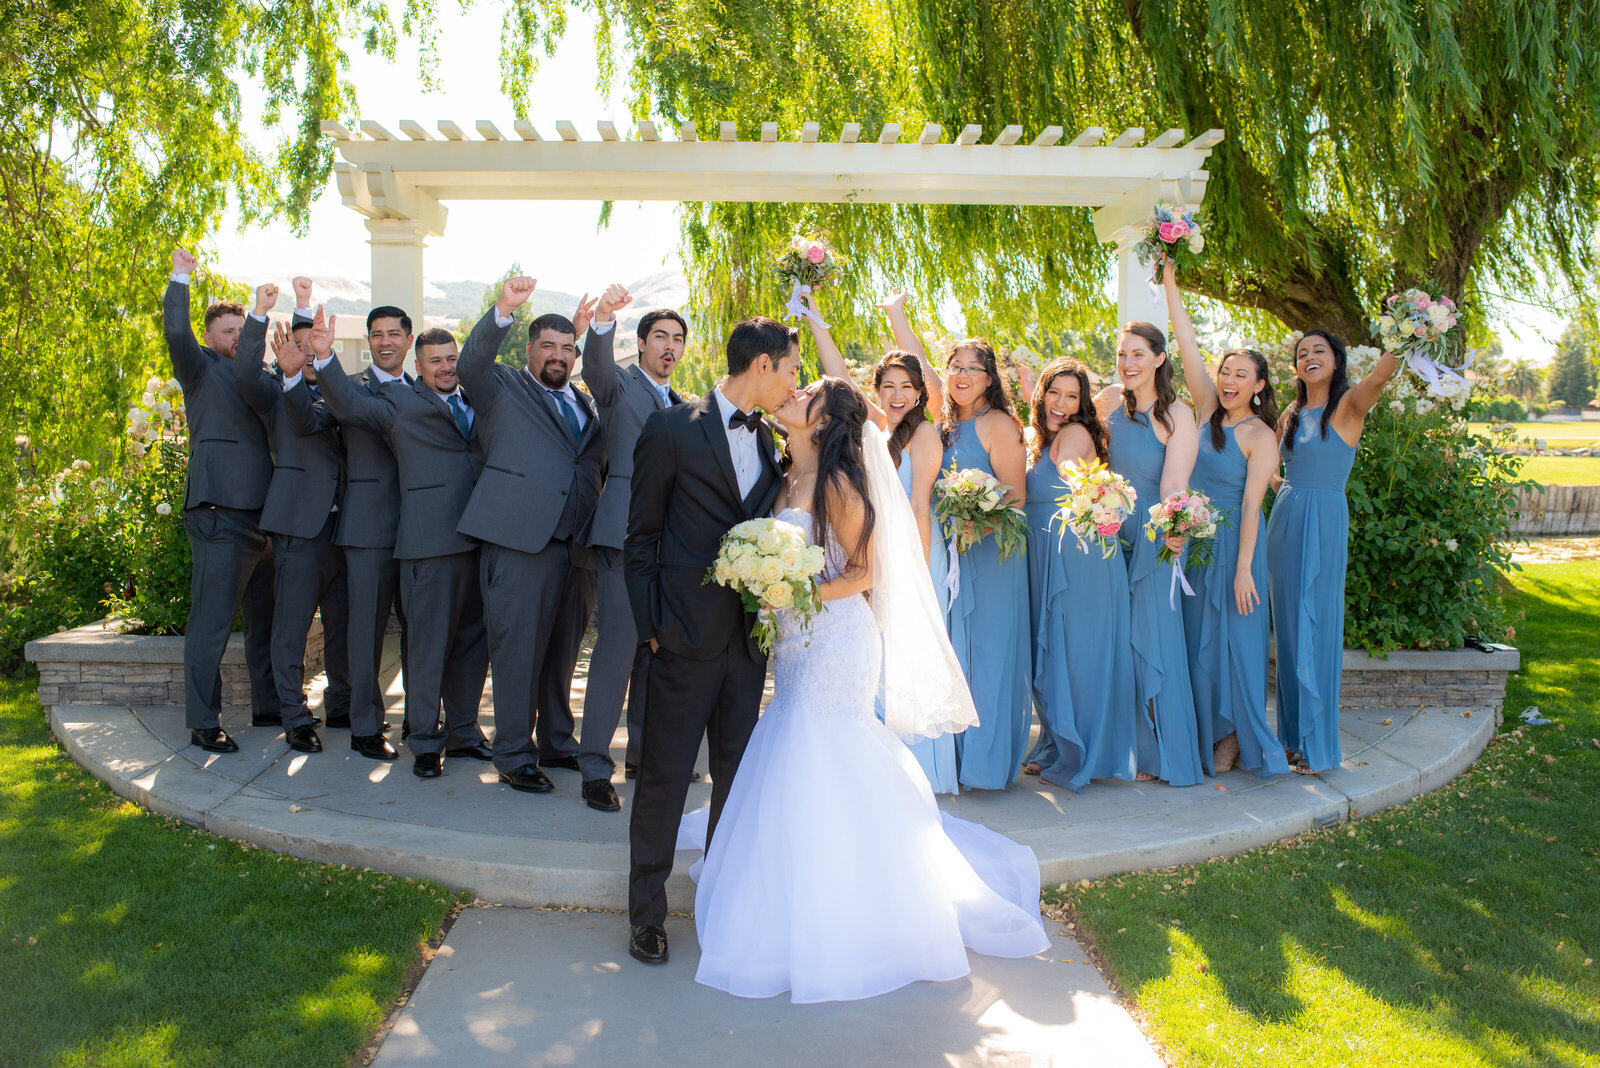 Bride and groom kiss in front of wedding party cheering them on from both sides. Girls are wearing a muted blue color and guys are wearing grey.  They are standing in front of a gazebo and large willow tree. Photo by wedding photographer philippe studio pro who has a studio in sacramento.